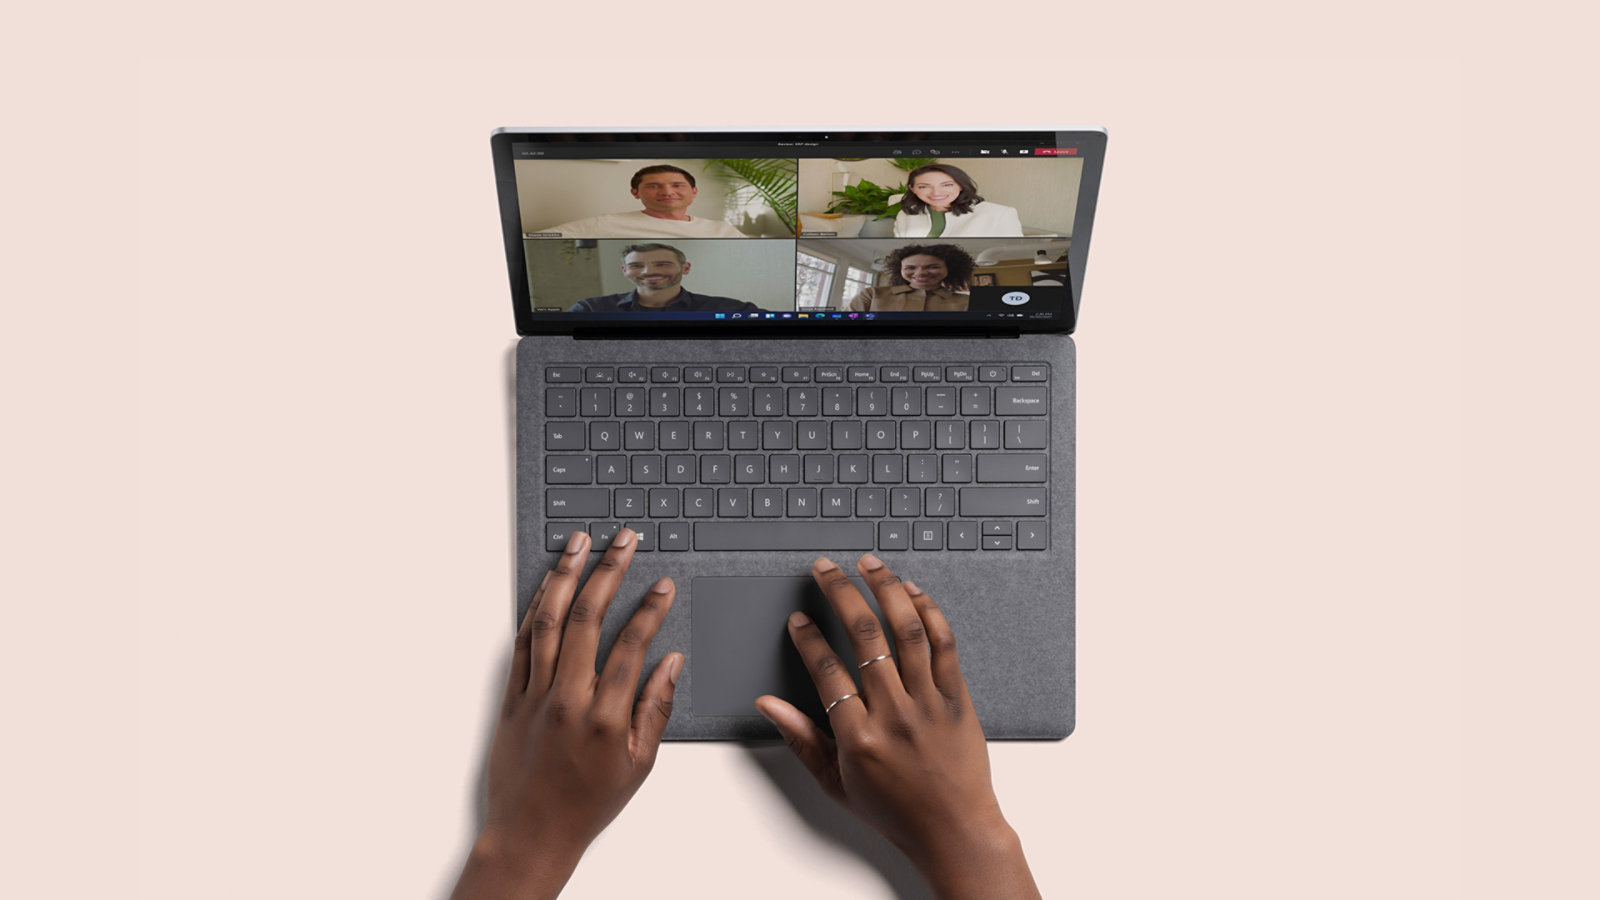 Microsoft Surface Laptop 4, 13.5 Touchsceen, Intel i7-1185G7, 4-core up tp  4.20 GHz, Intel Iris Xe Graphics, Backlit, 16GB DDR4 RAM, 512GB PCIe SSD